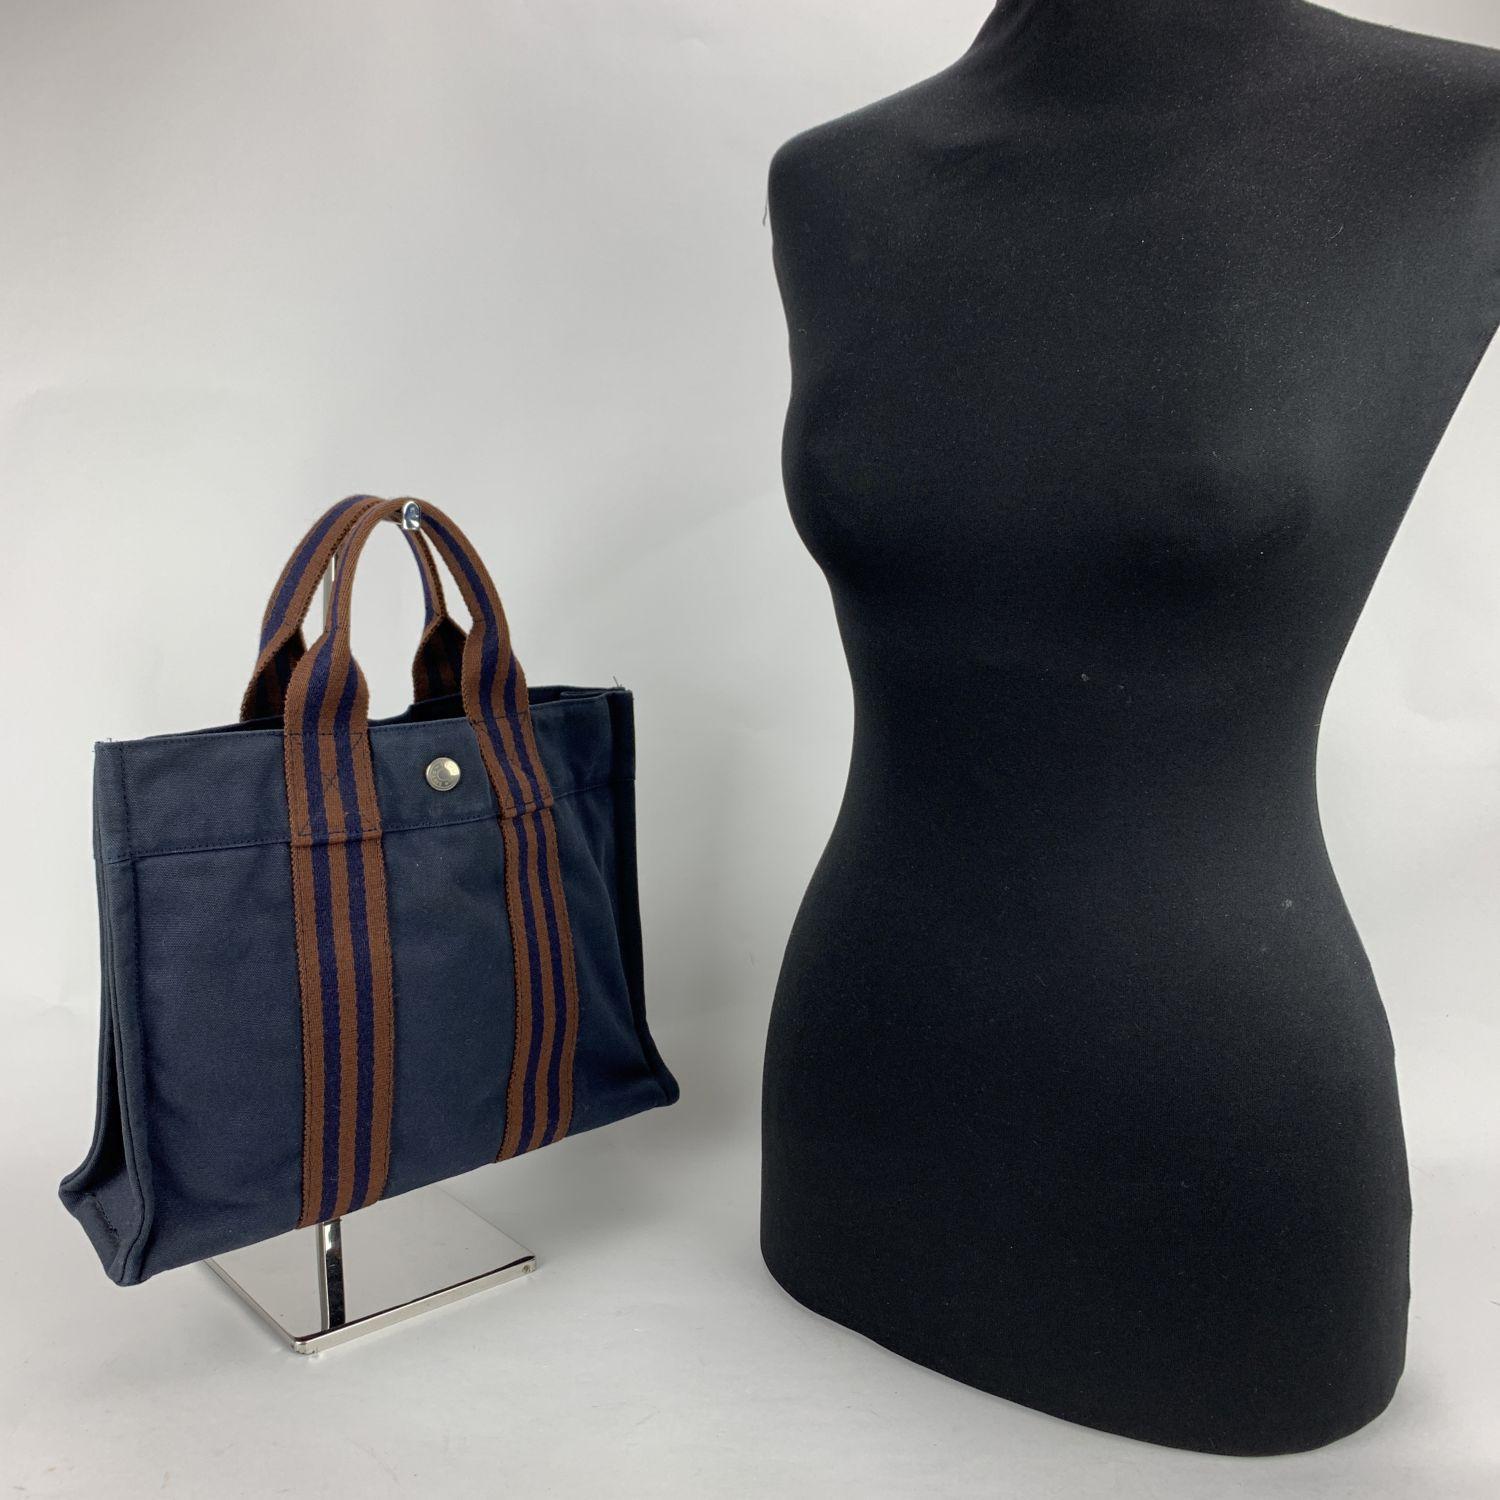 Model: 'HERMES FOURRE TOUT - PM' Tote handbag. Made in France. Blue color with brown stripes. Material: 100% cotton. It has snaps on both ends for expansion. Durable canvas handles, perfect for casual and everyday use. Open top with middle snap